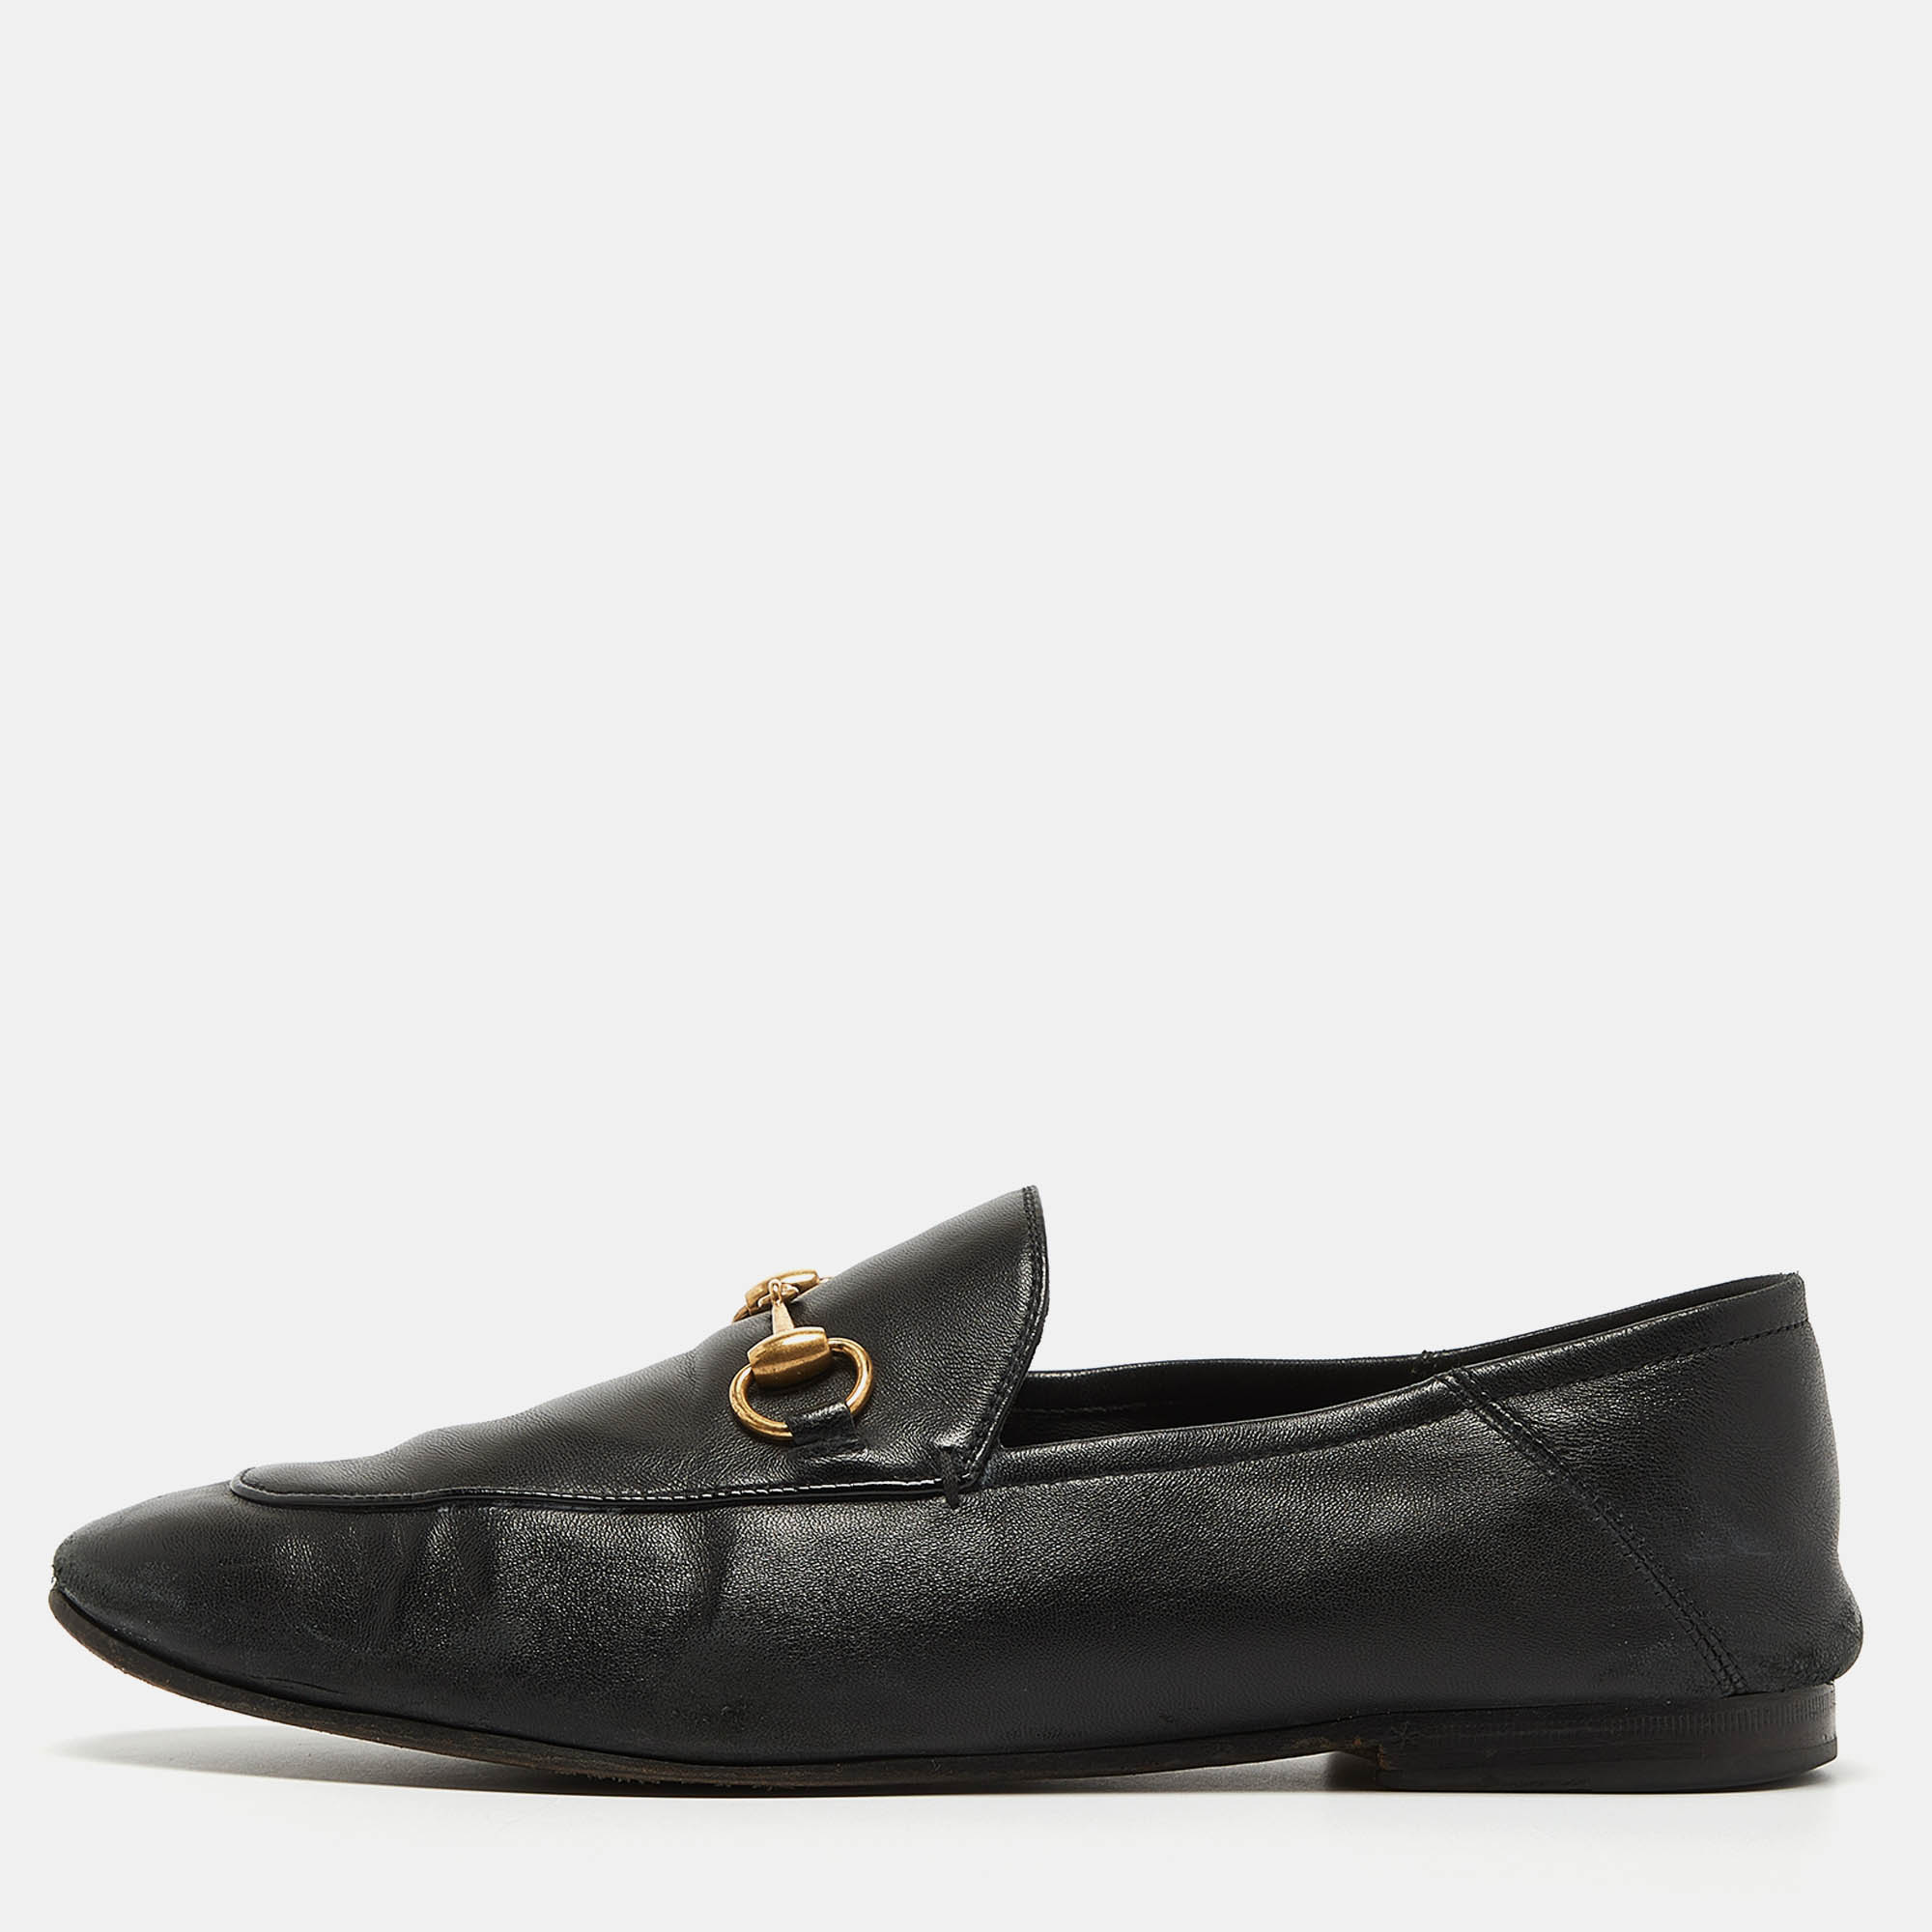 

Gucci Jordaan Black Leather Slip On Loafers Size